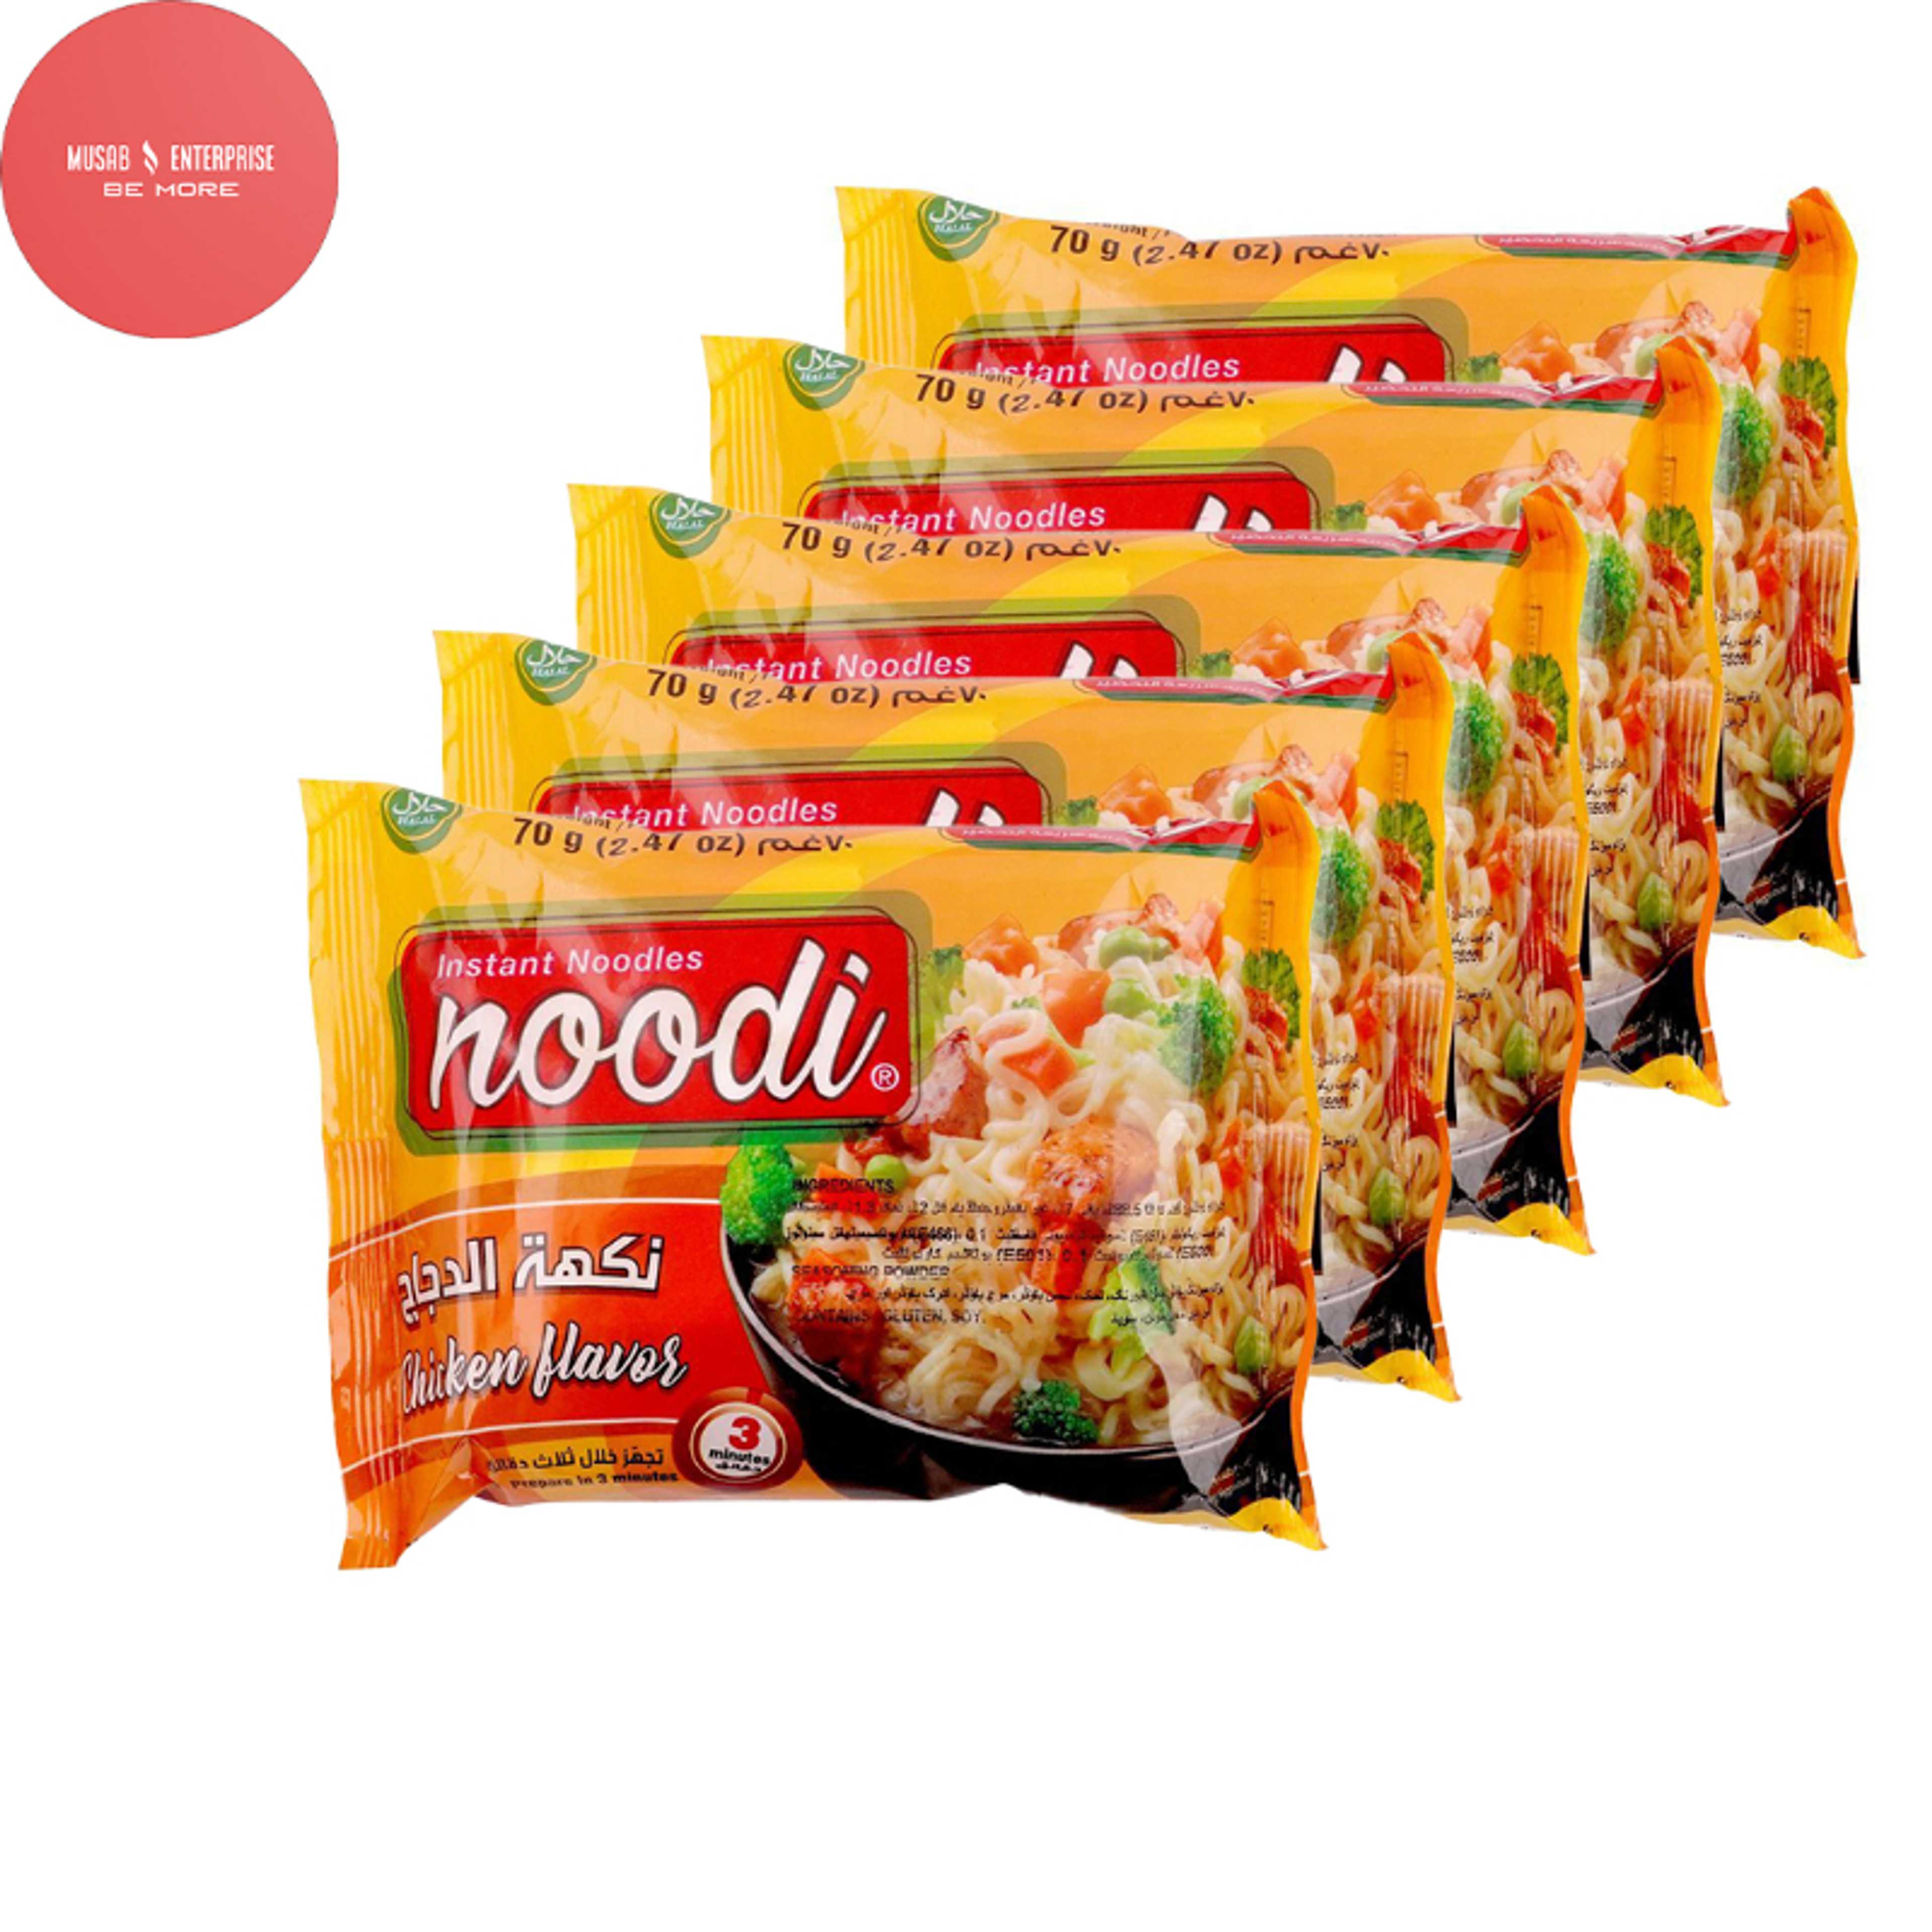 Noodi Chicken Flavor Instant Noodles, 70g, Pack of 5 Noodles (Available in 9 Exciting Flavors)